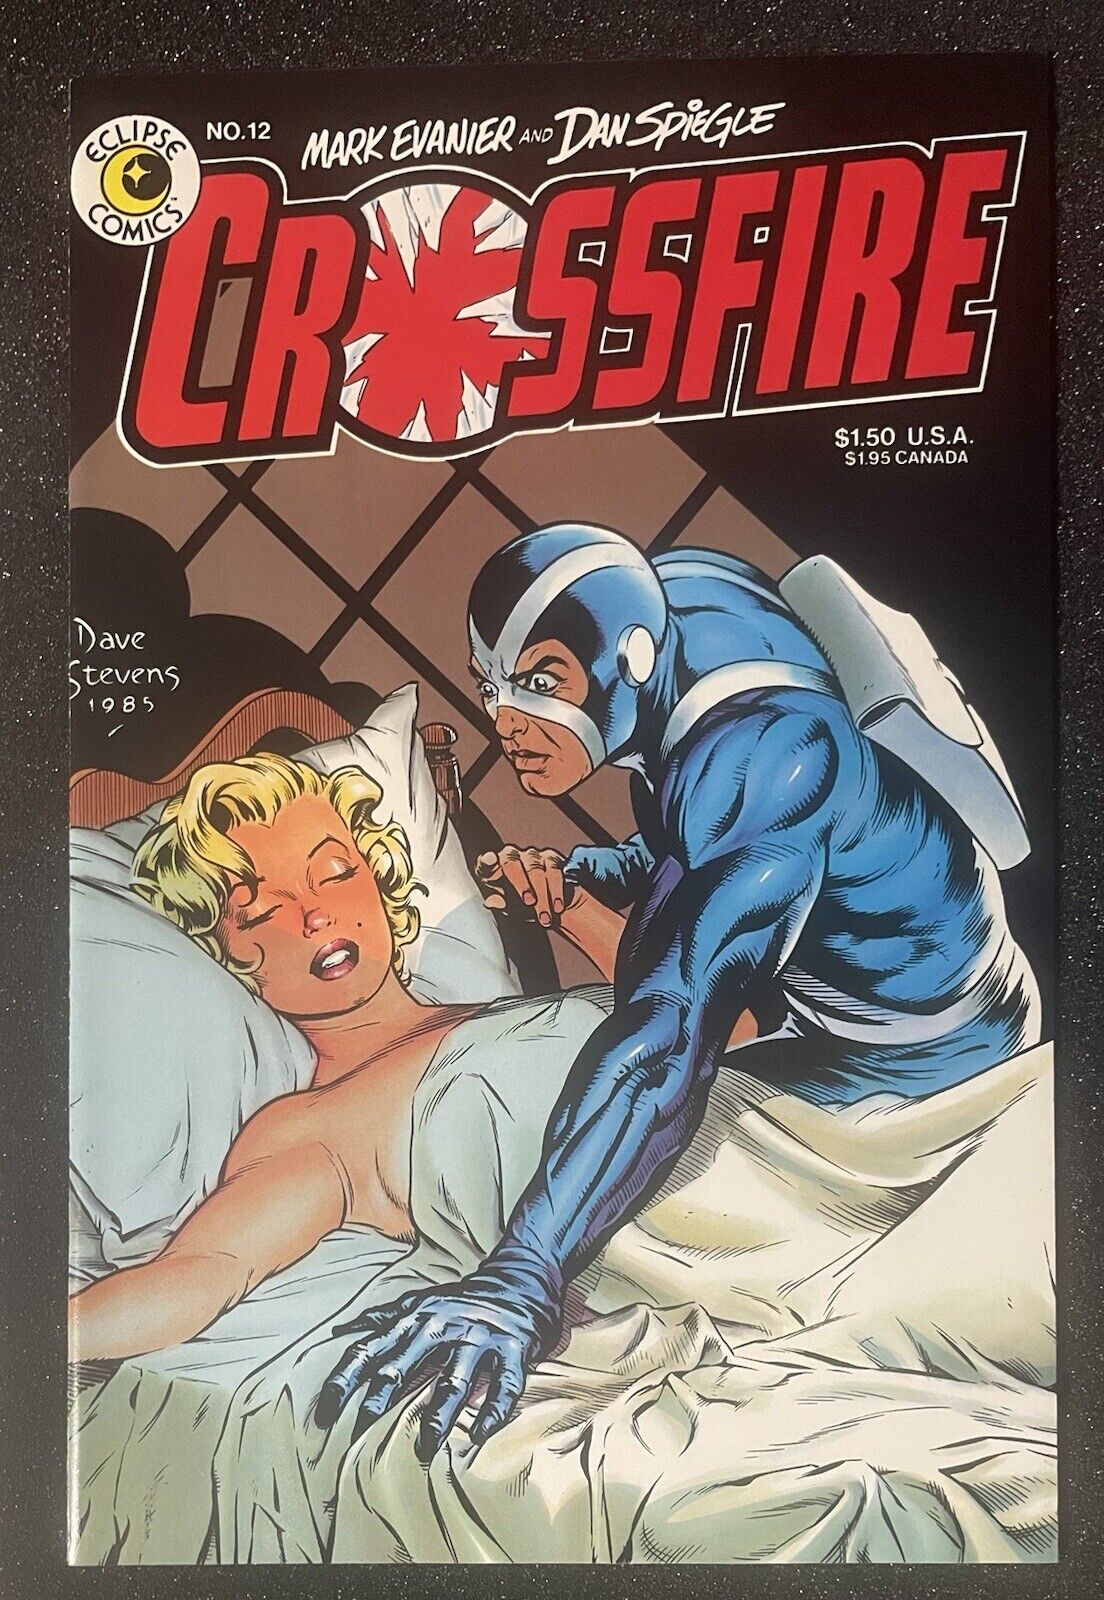 CROSSFIRE #12 1985 MARILYN MONROE Dave Stevens Cover NM 9.4 maybe M 9.8? not CGC